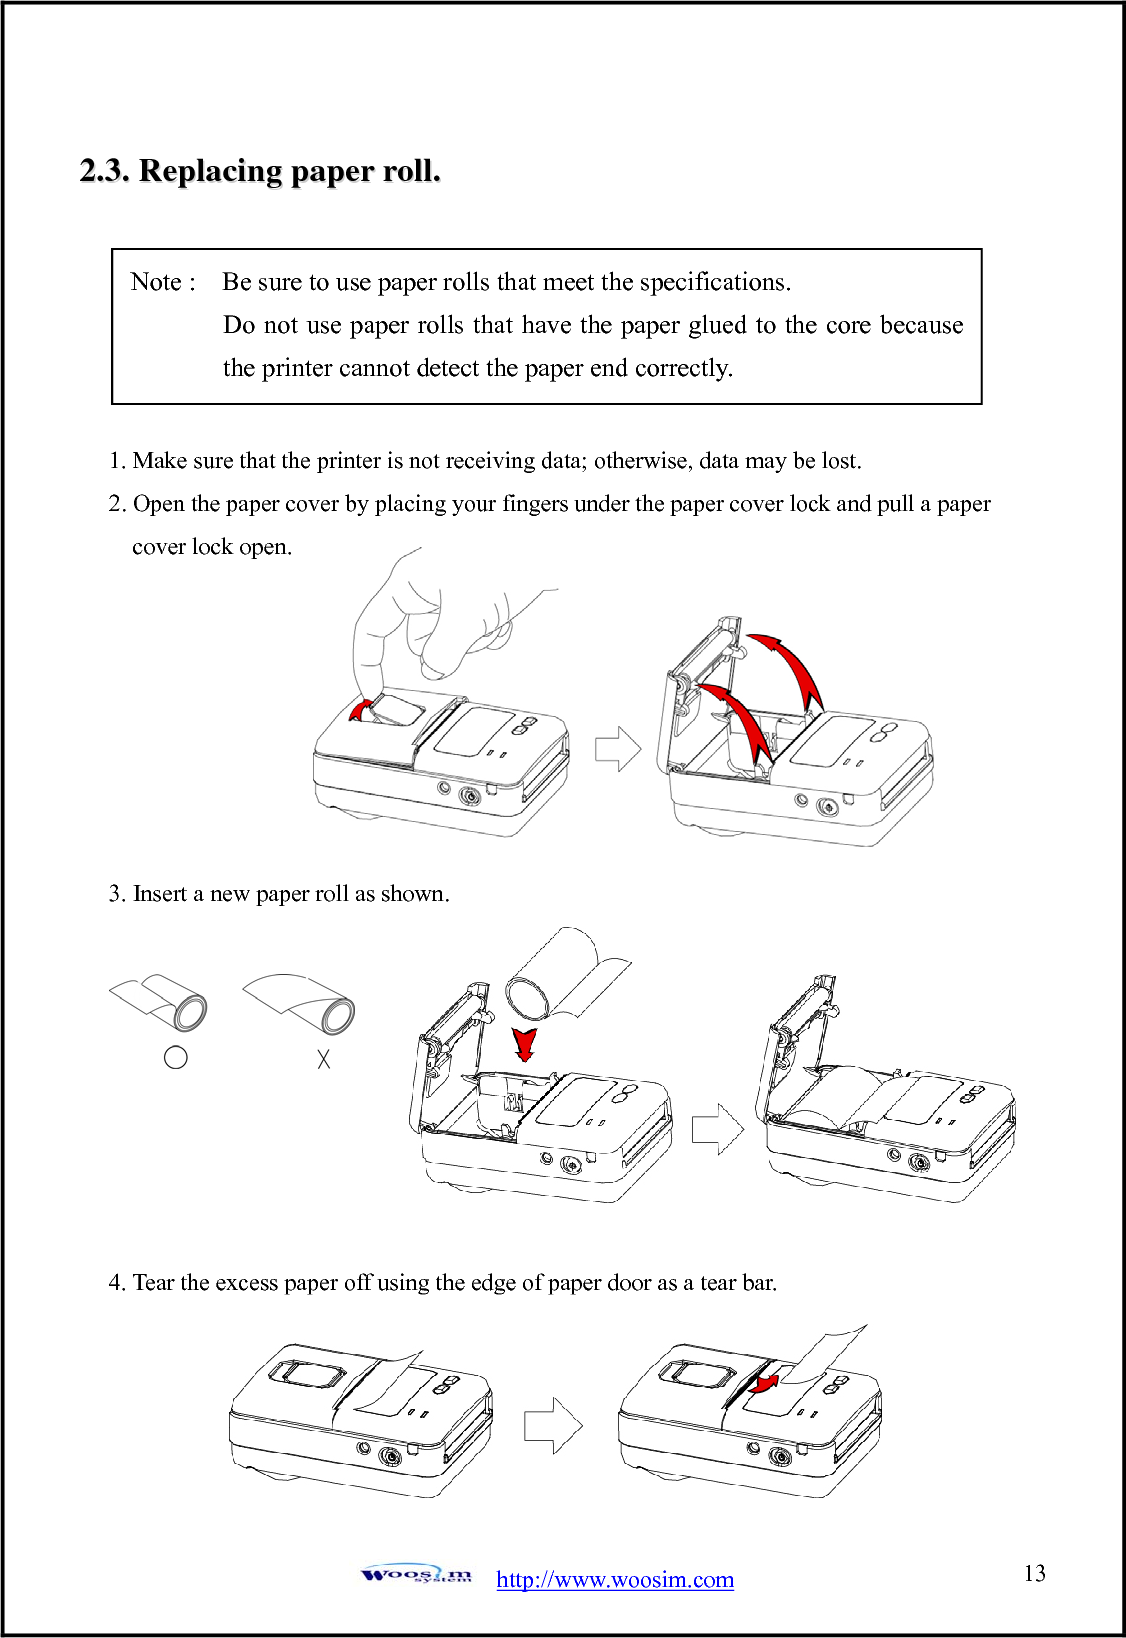  http://www.woosim.com 1322..33..  RReeppllaacciinngg  ppaappeerr  rroollll..                                     1. Make sure that the printer is not receiving data; otherwise, data may be lost. 2. Open the paper cover by placing your fingers under the paper cover lock and pull a paper cover lock open.         3. Insert a new paper roll as shown.         4. Tear the excess paper off using the edge of paper door as a tear bar.      Note :    Be sure to use paper rolls that meet the specifications.        Do not use paper rolls that have the paper glued to the core because the printer cannot detect the paper end correctly. 